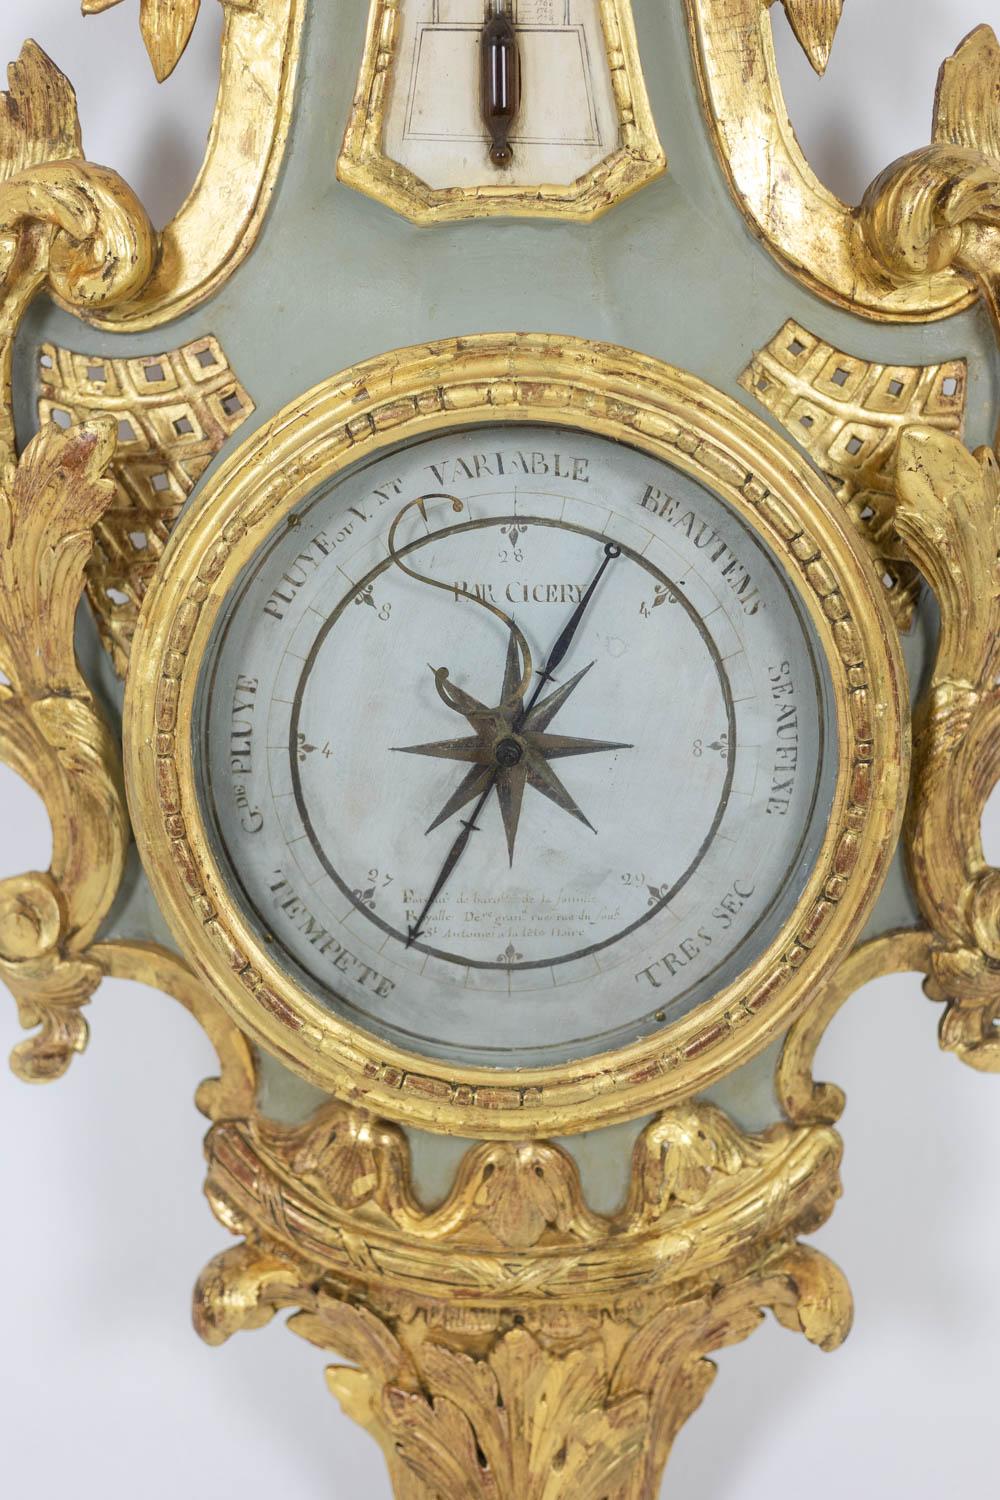 Cicery. Barometer in carved and gilded wood. 18th century period. 3